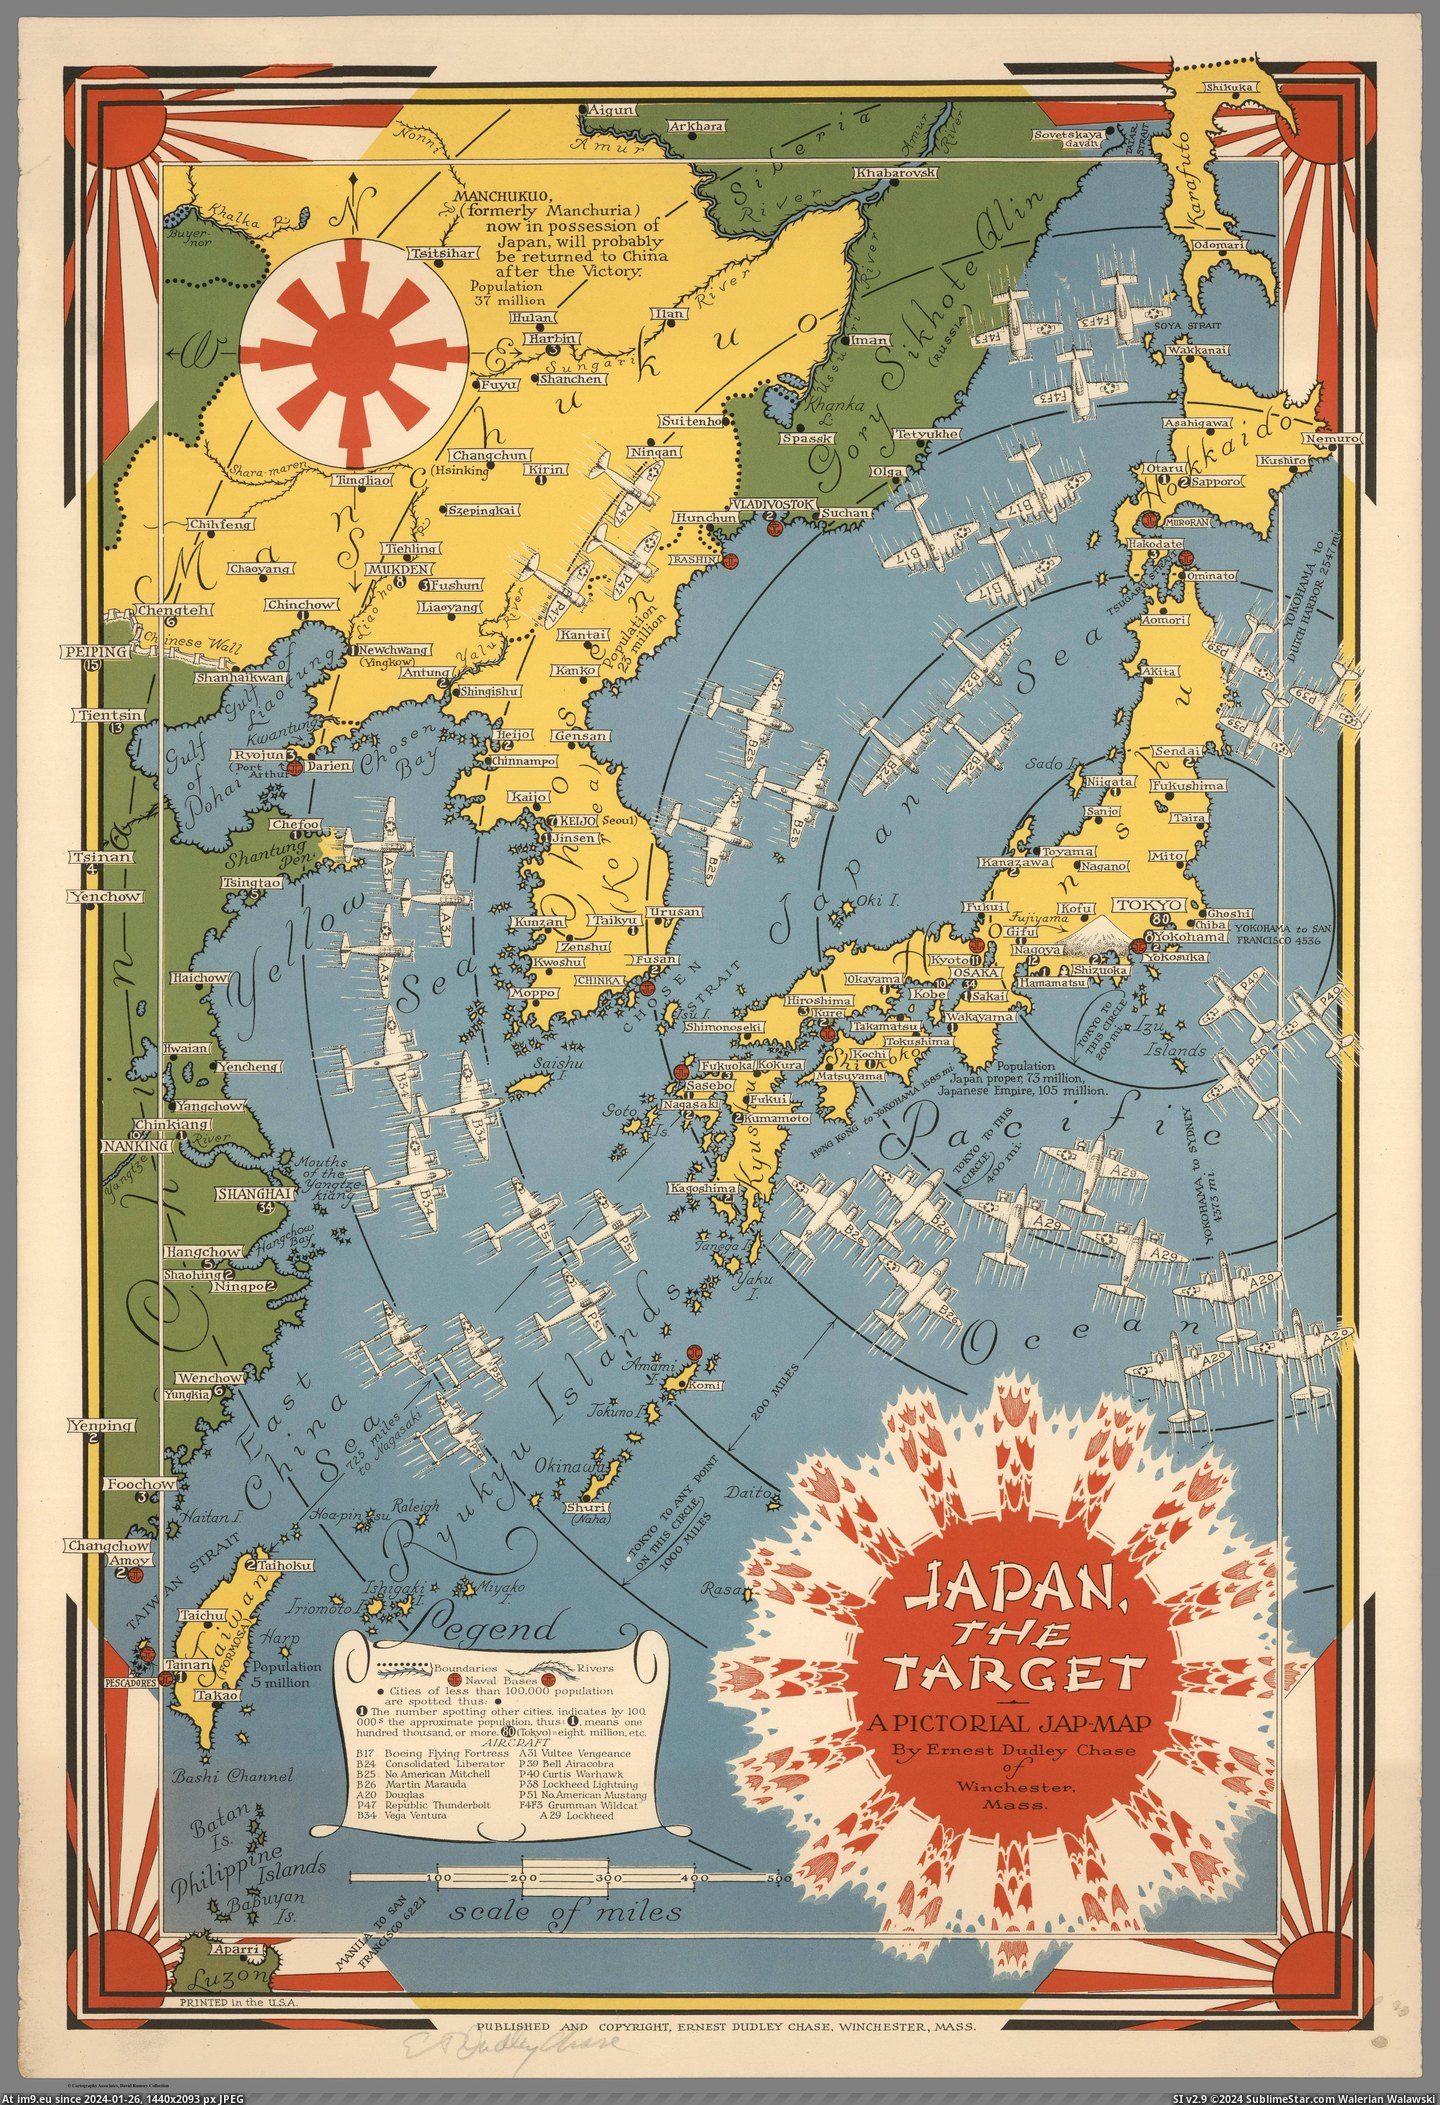 #Map #Japan #Ernest #Pictorial #Dudley #Chase #Target [Mapporn] Japan the Target, a pictorial map made by Ernest Dudley Chase, 1942 [4003x5830] Pic. (Obraz z album My r/MAPS favs))